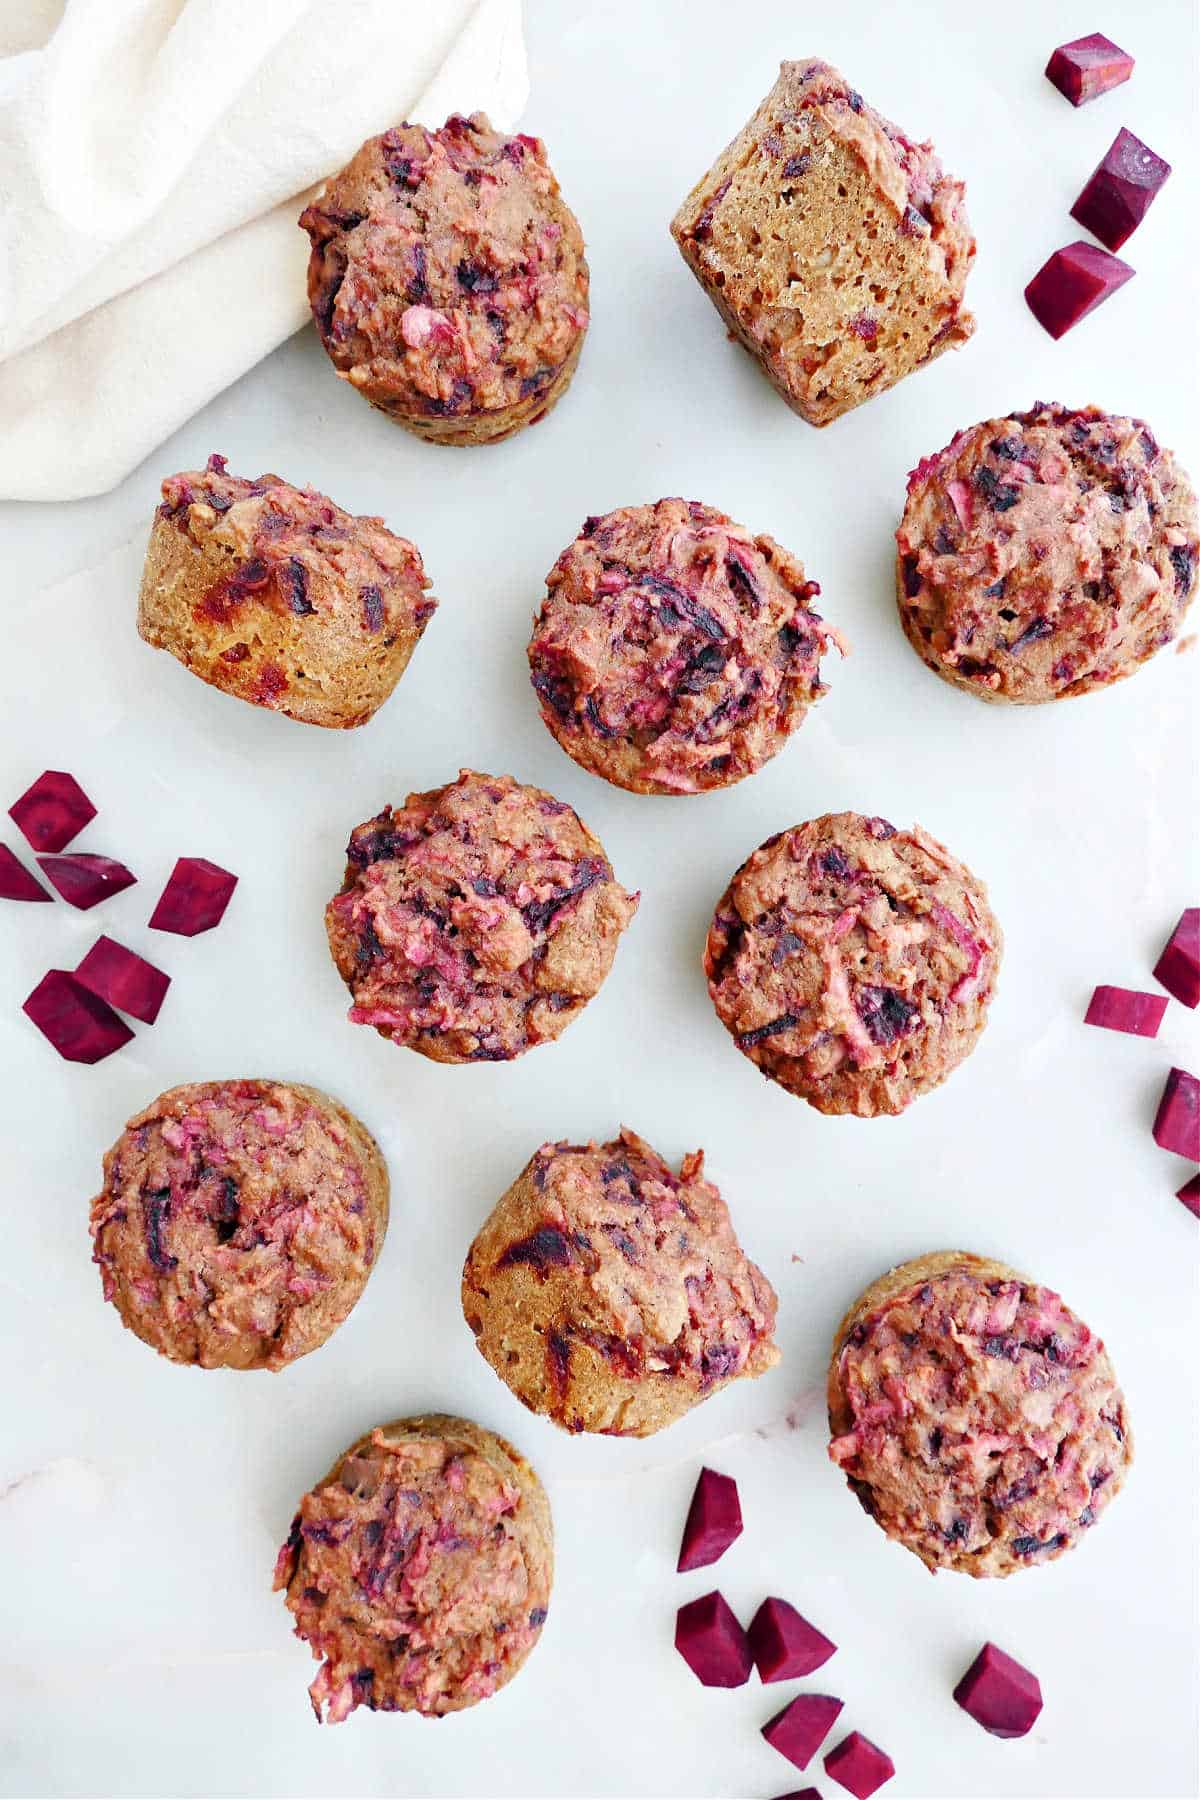 11 beet apple muffins spread out on a counter next to cubed beets